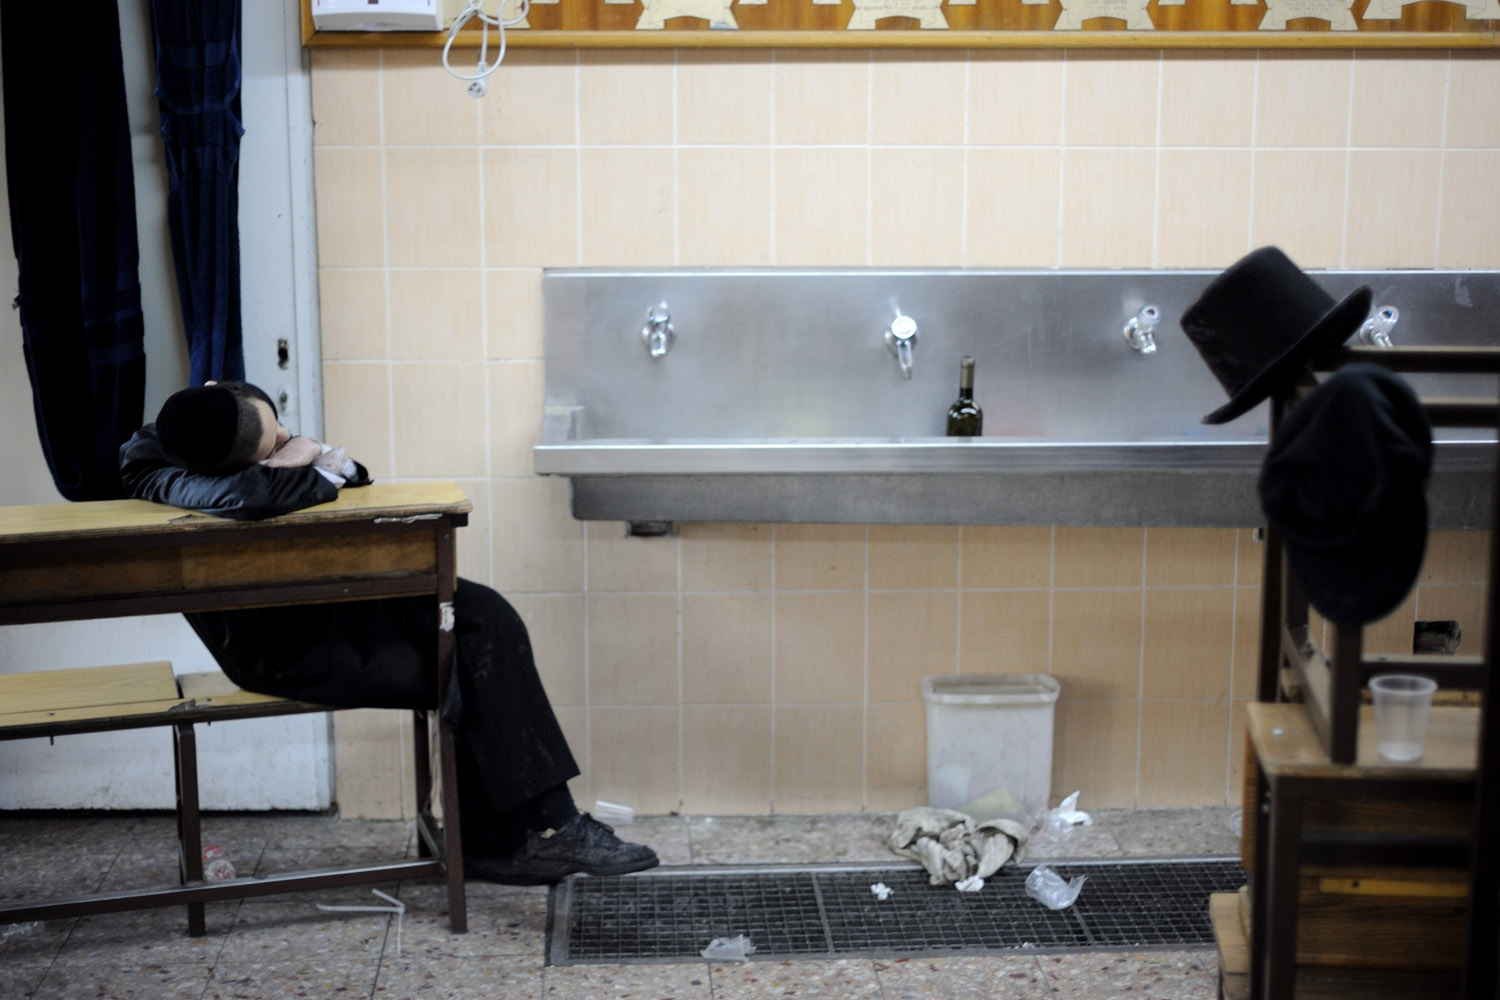 Mar. 17, 2014. An Ultra-Orthodox Jew rests during celebrations of Purim in the Mea Shearim neighborhood in Jerusalem.